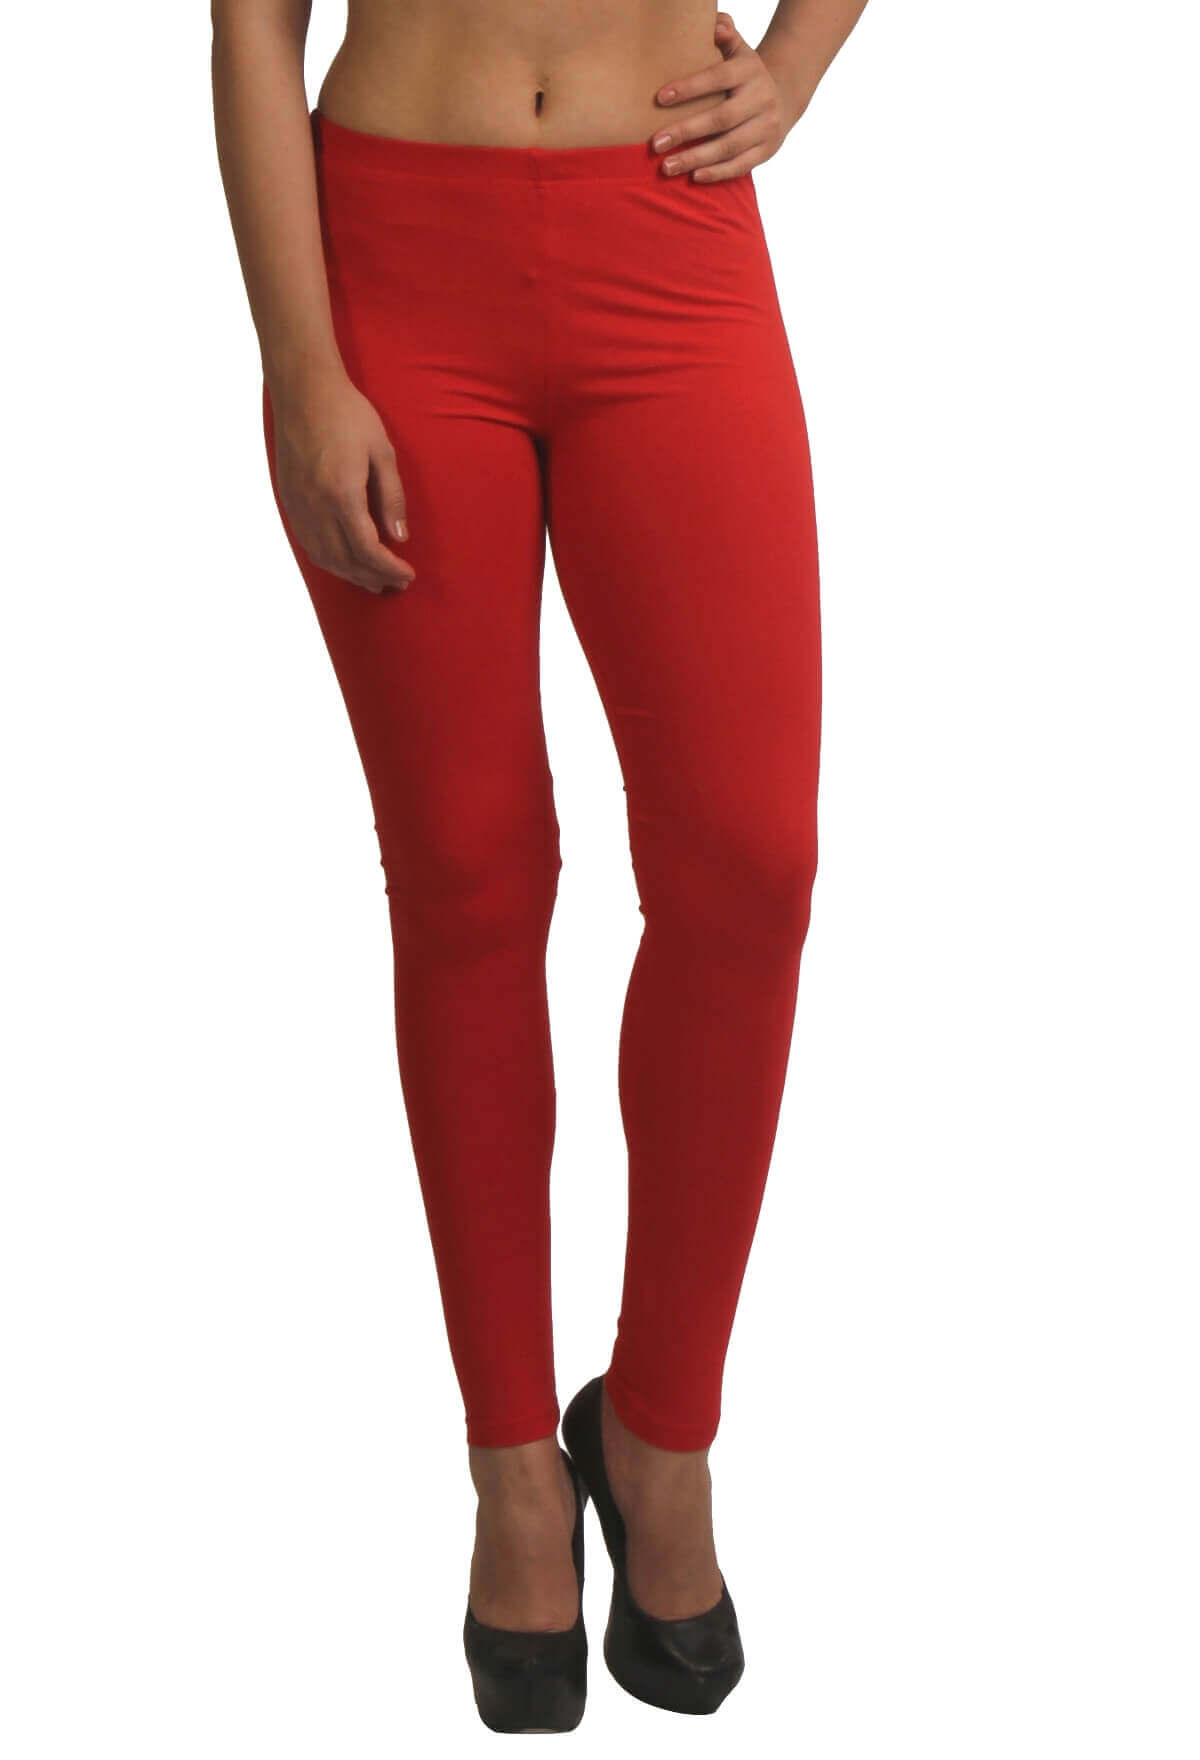 Frenchtrendz Cotton Spandex Fleece Red Warmer Ankle Leggings